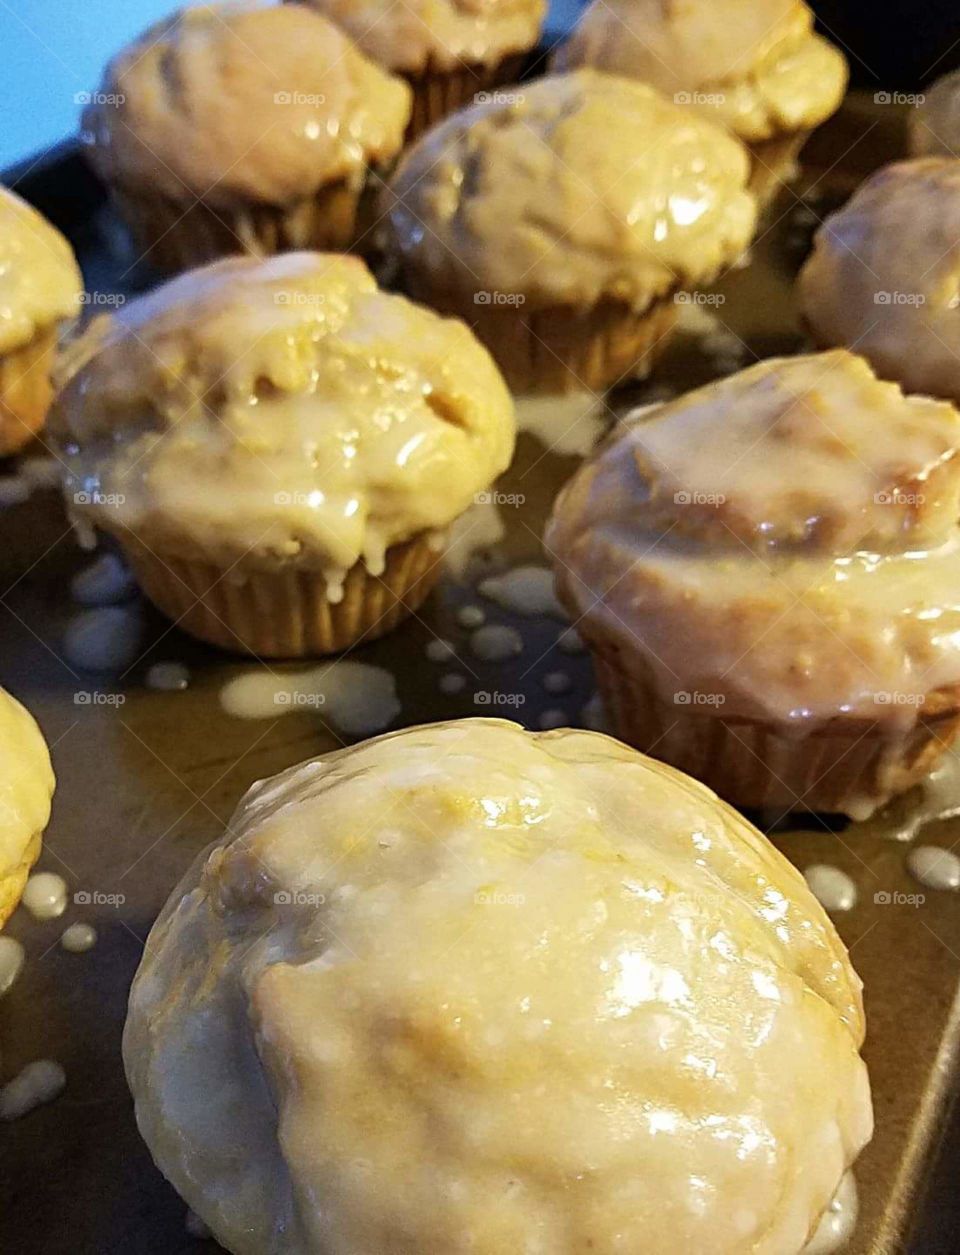 "Old Fashioned" Muffins